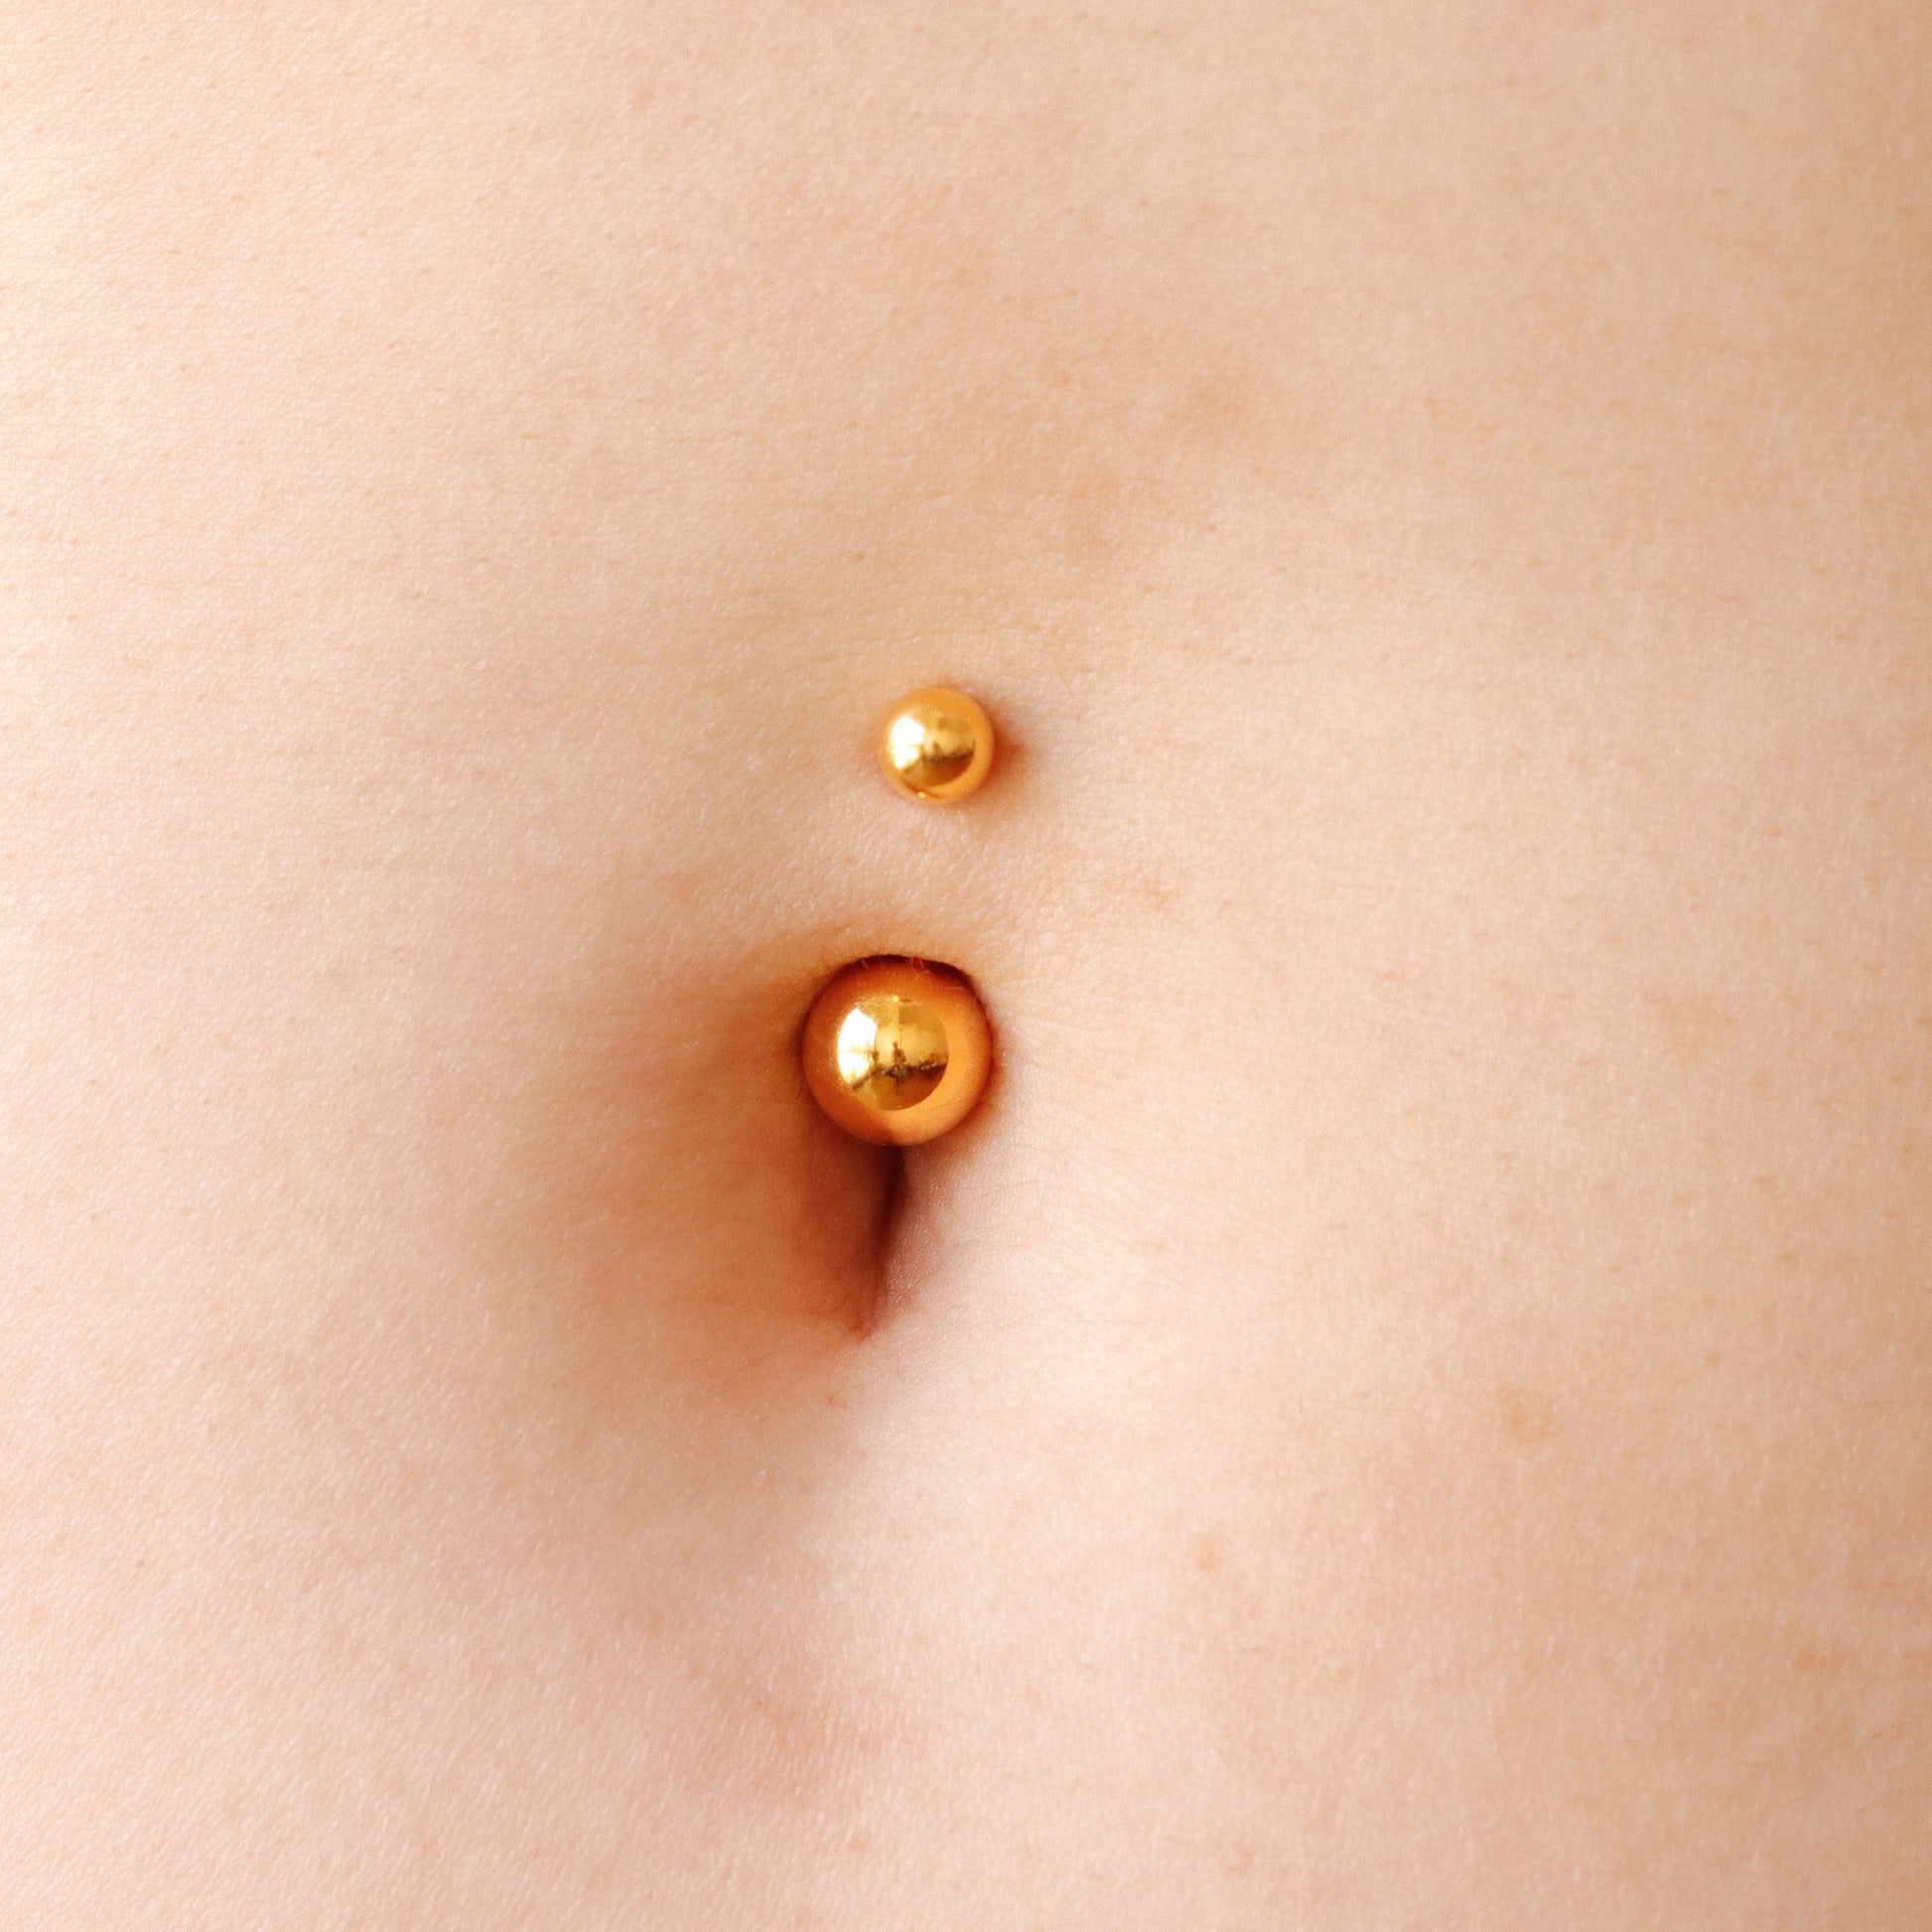 Vermeil | 925 Silver 24k Gold Coated Classic Ball Combination Belly Ring | 14G 6mm 1/4" 8mm 5/16" 10mm 3/8" - Sturdy South